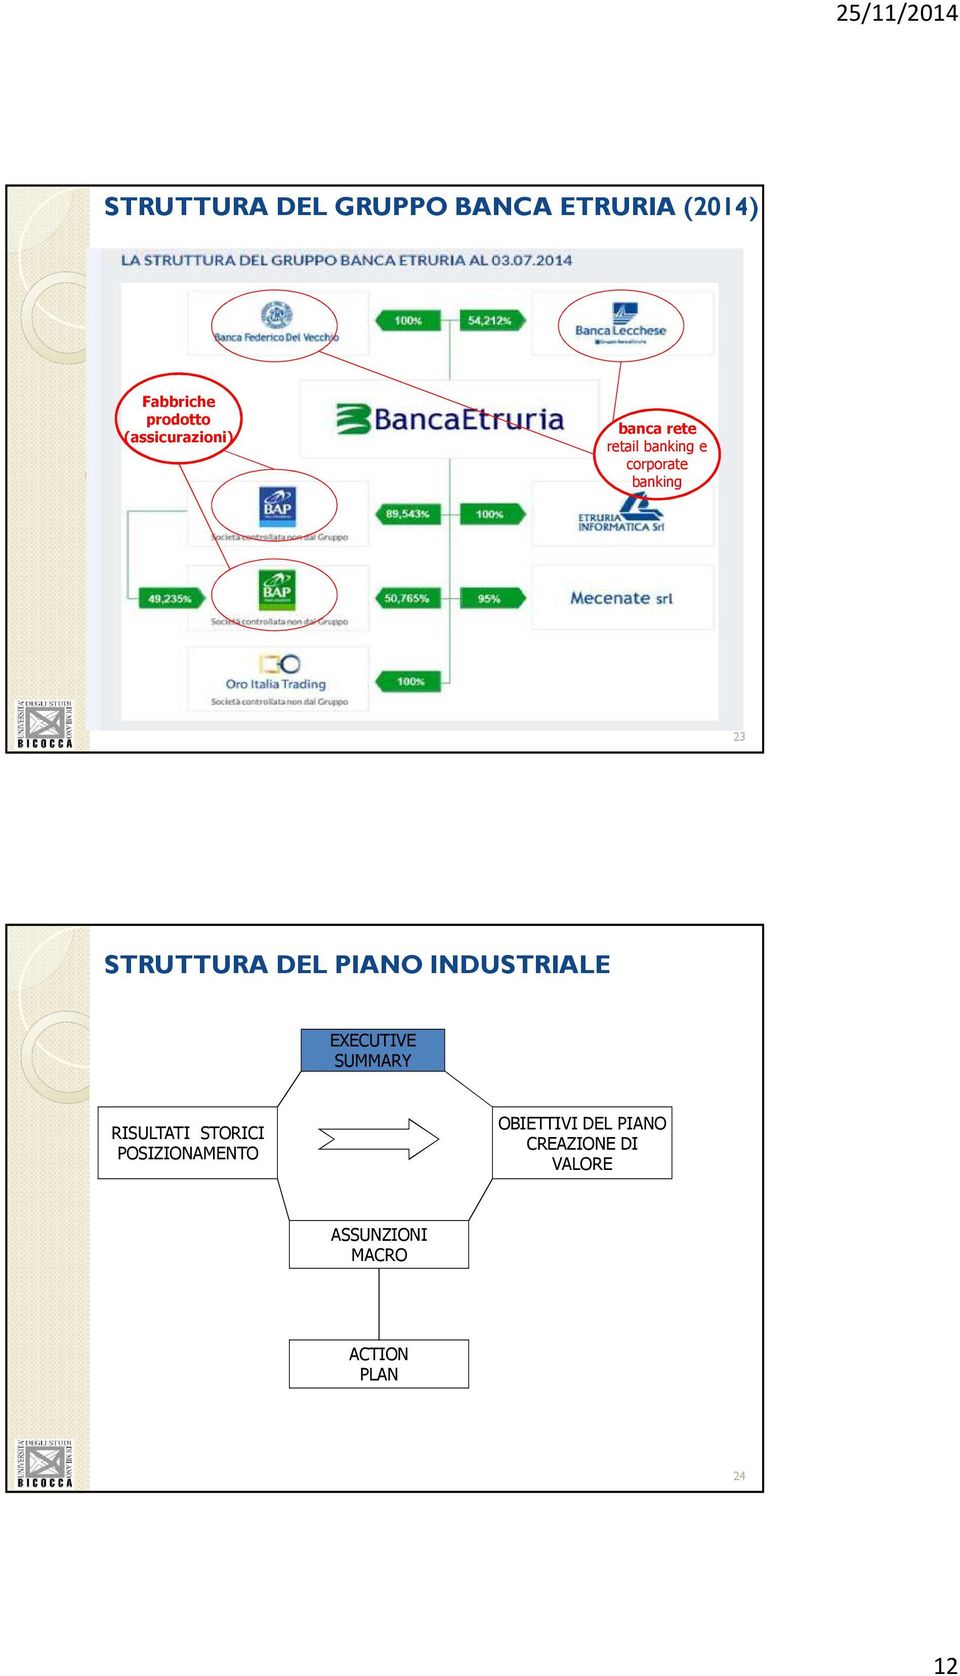 management management investment banking 23 STRUTTURA DEL PIANO INDUSTRIALE EXECUTIVE SUMMARY